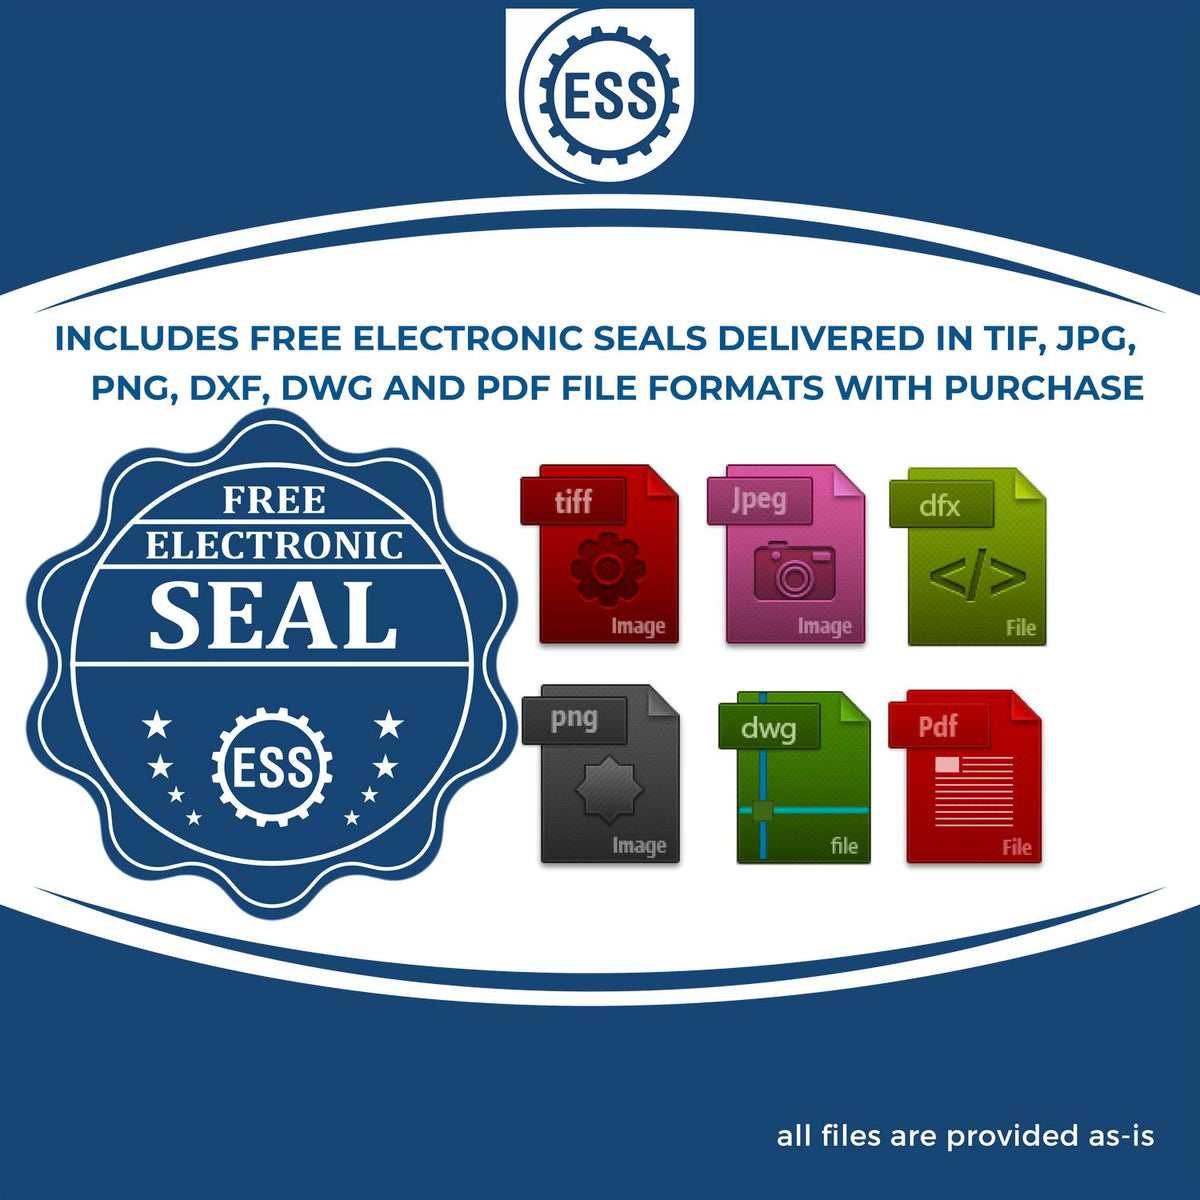 An infographic for the free electronic seal for the Long Reach Alaska Land Surveyor Seal illustrating the different file type icons such as DXF, DWG, TIF, JPG and PNG.